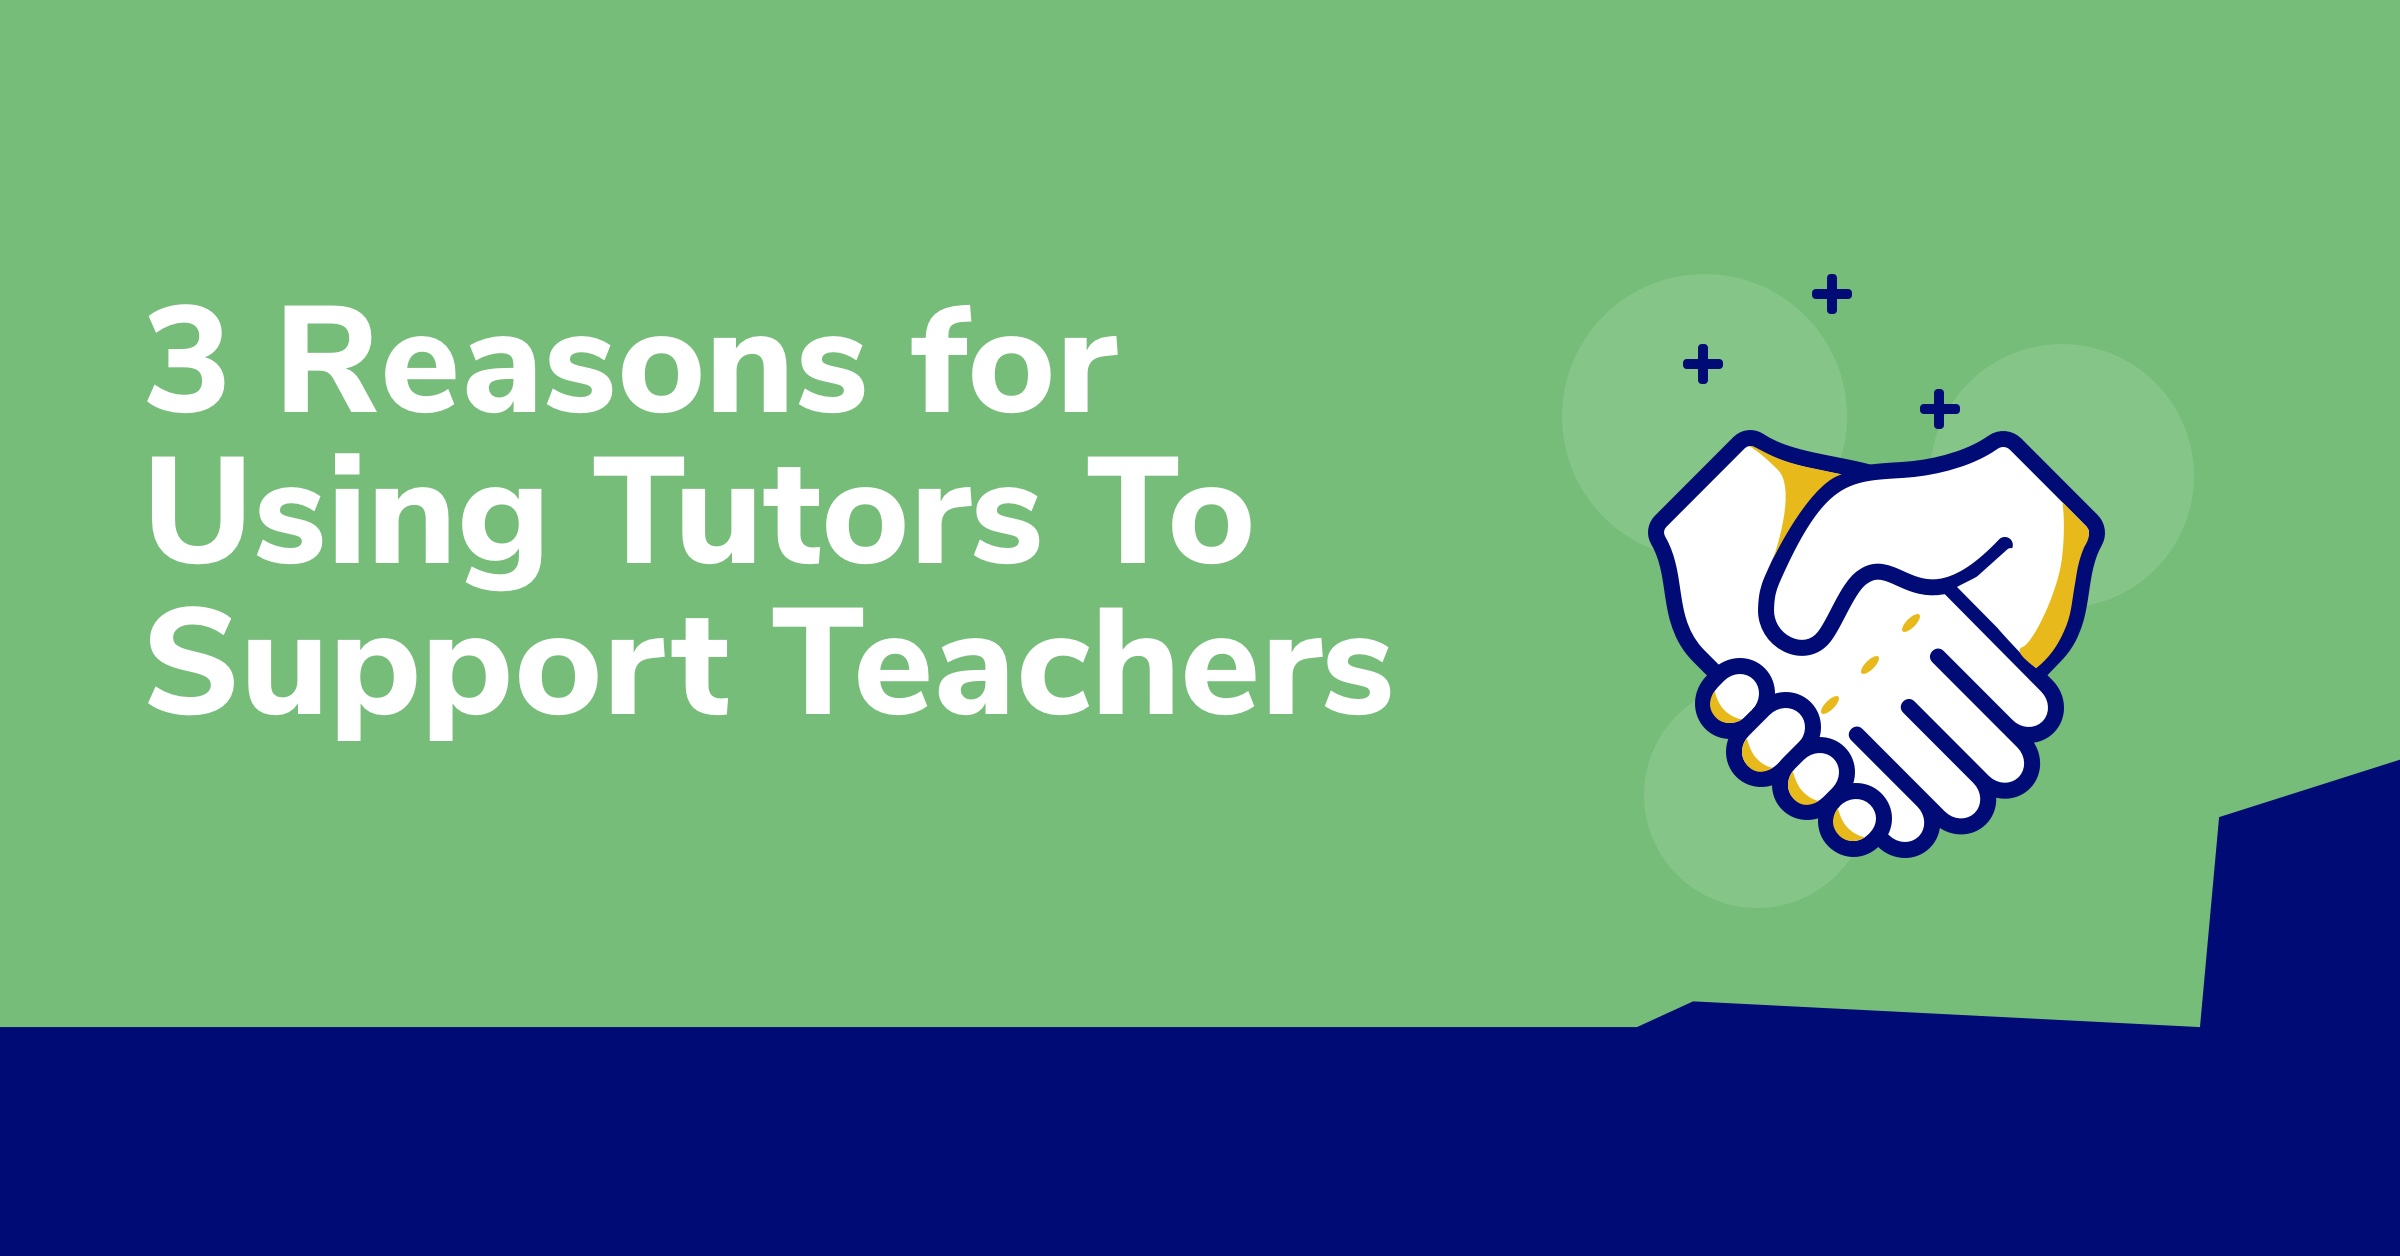 3 Reasons for Using Tutors To Support Teachers